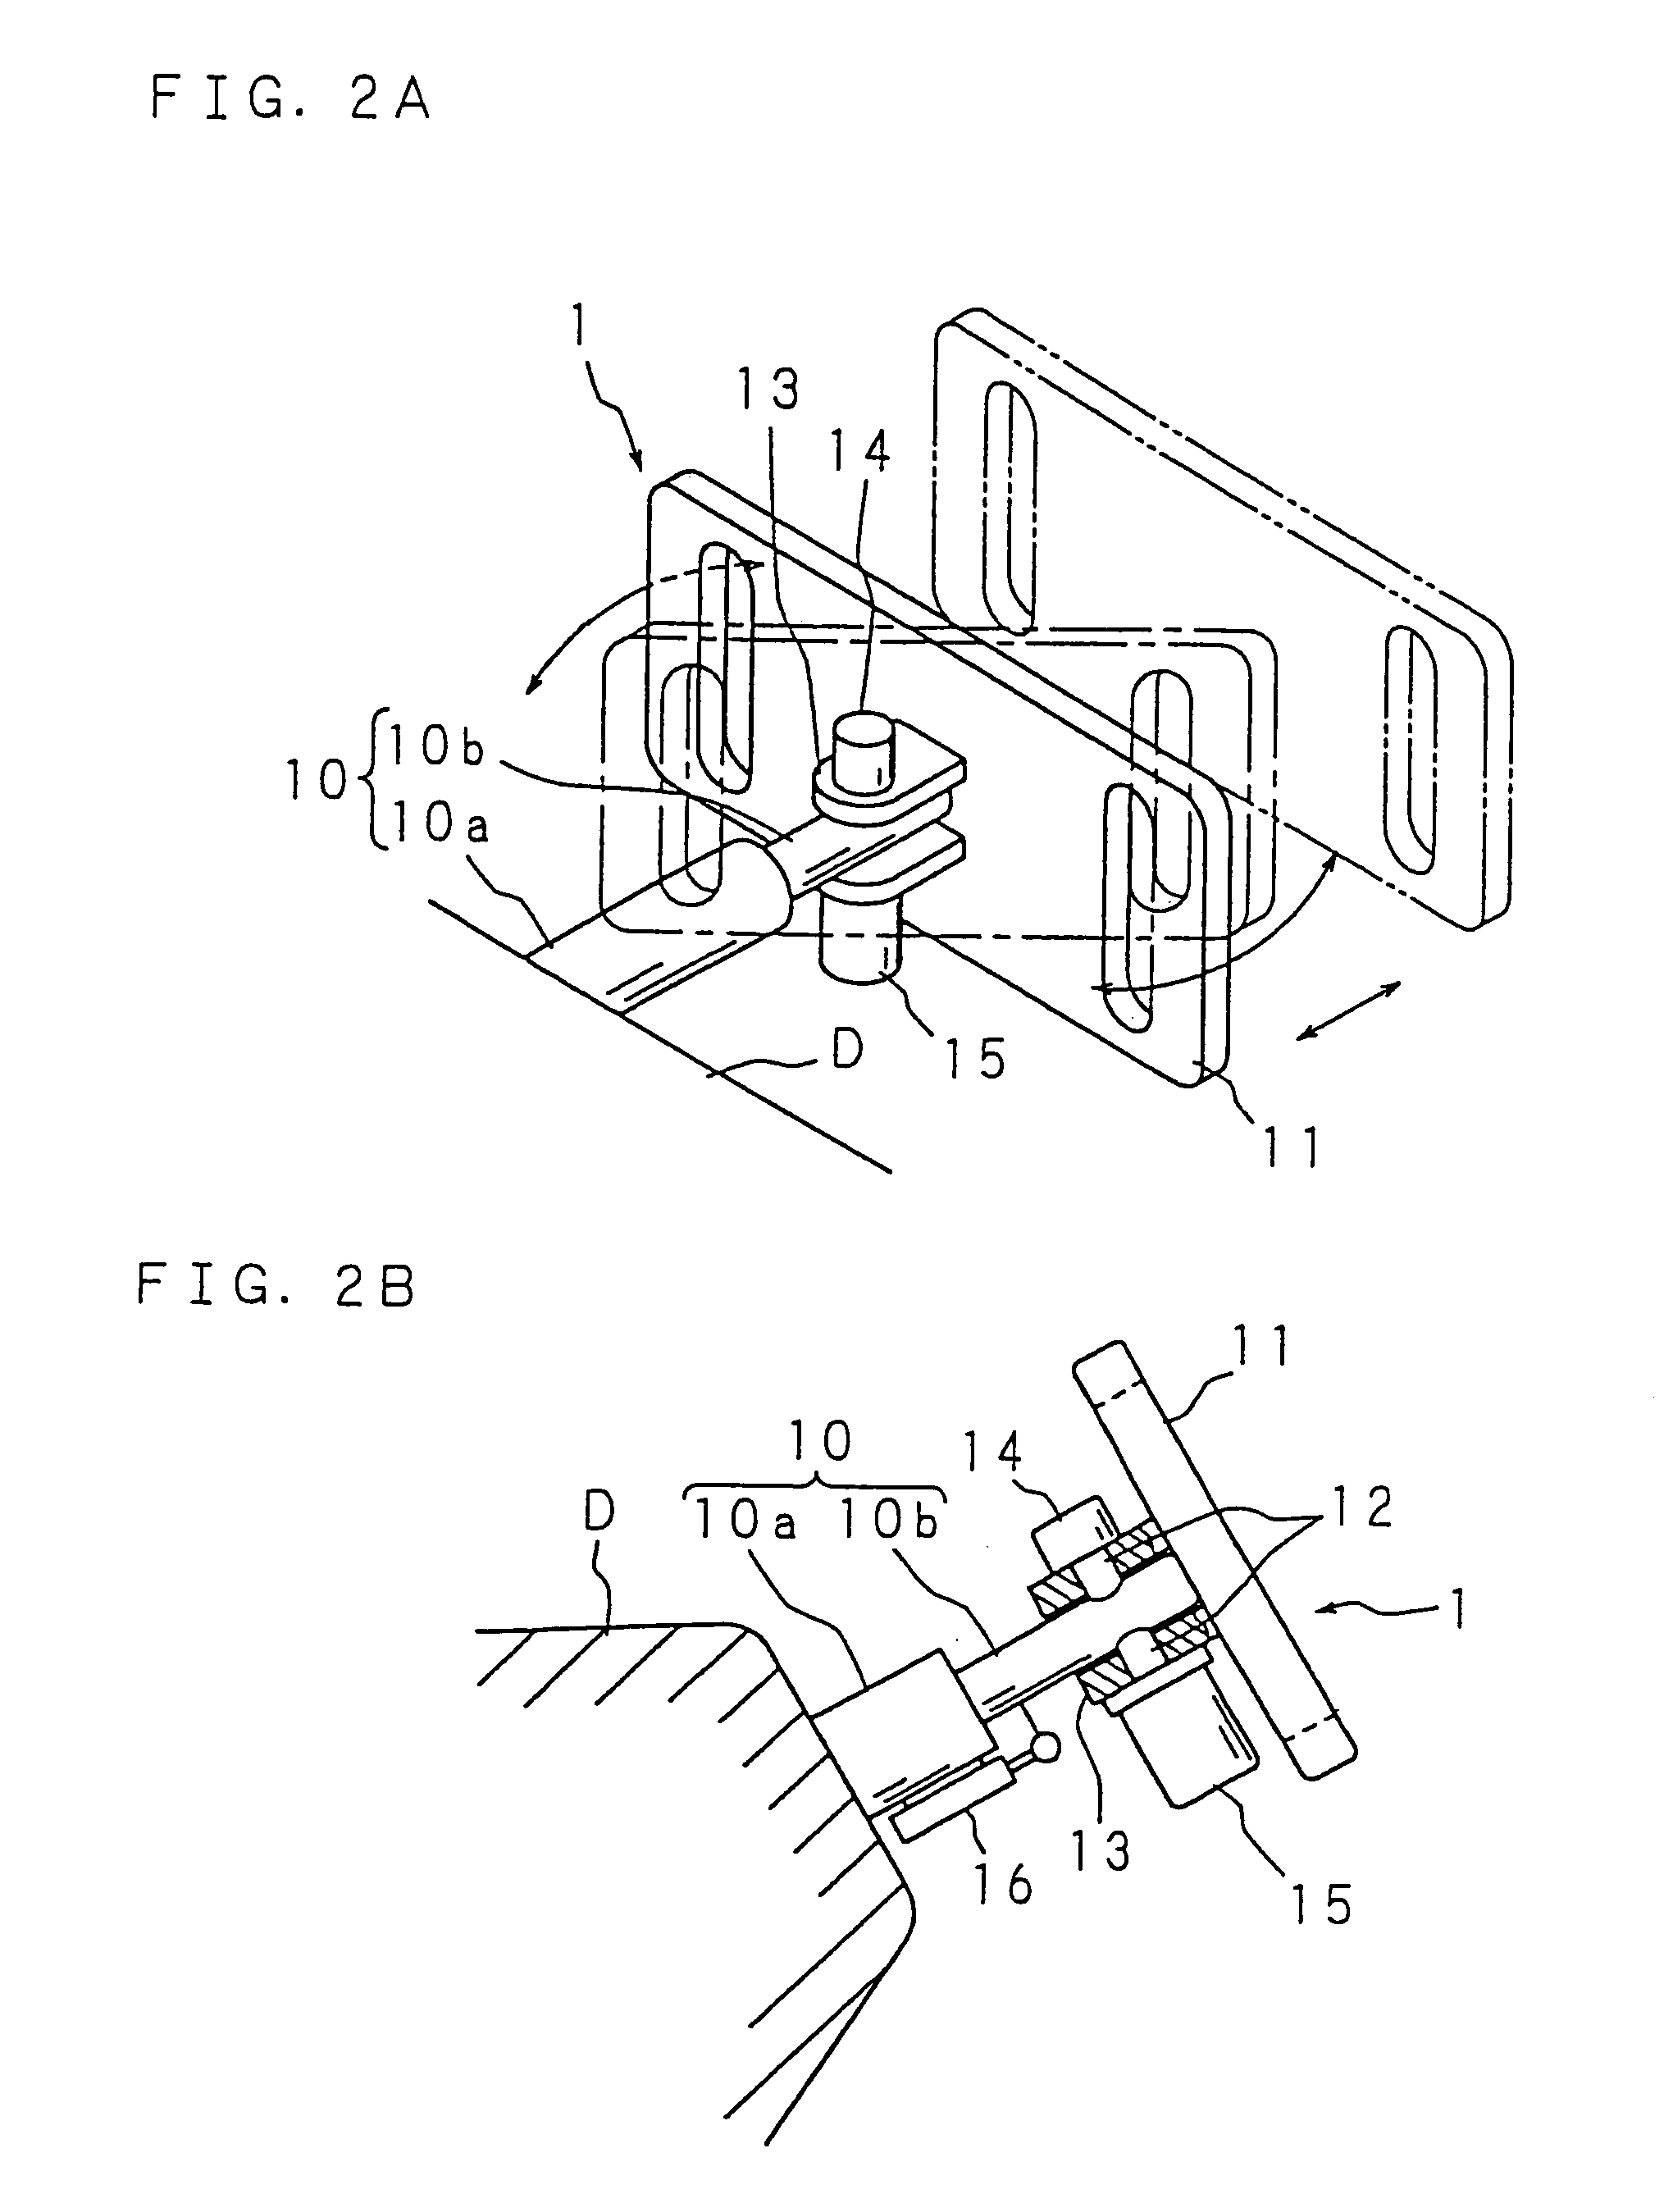 Steering apparatus for vehicle